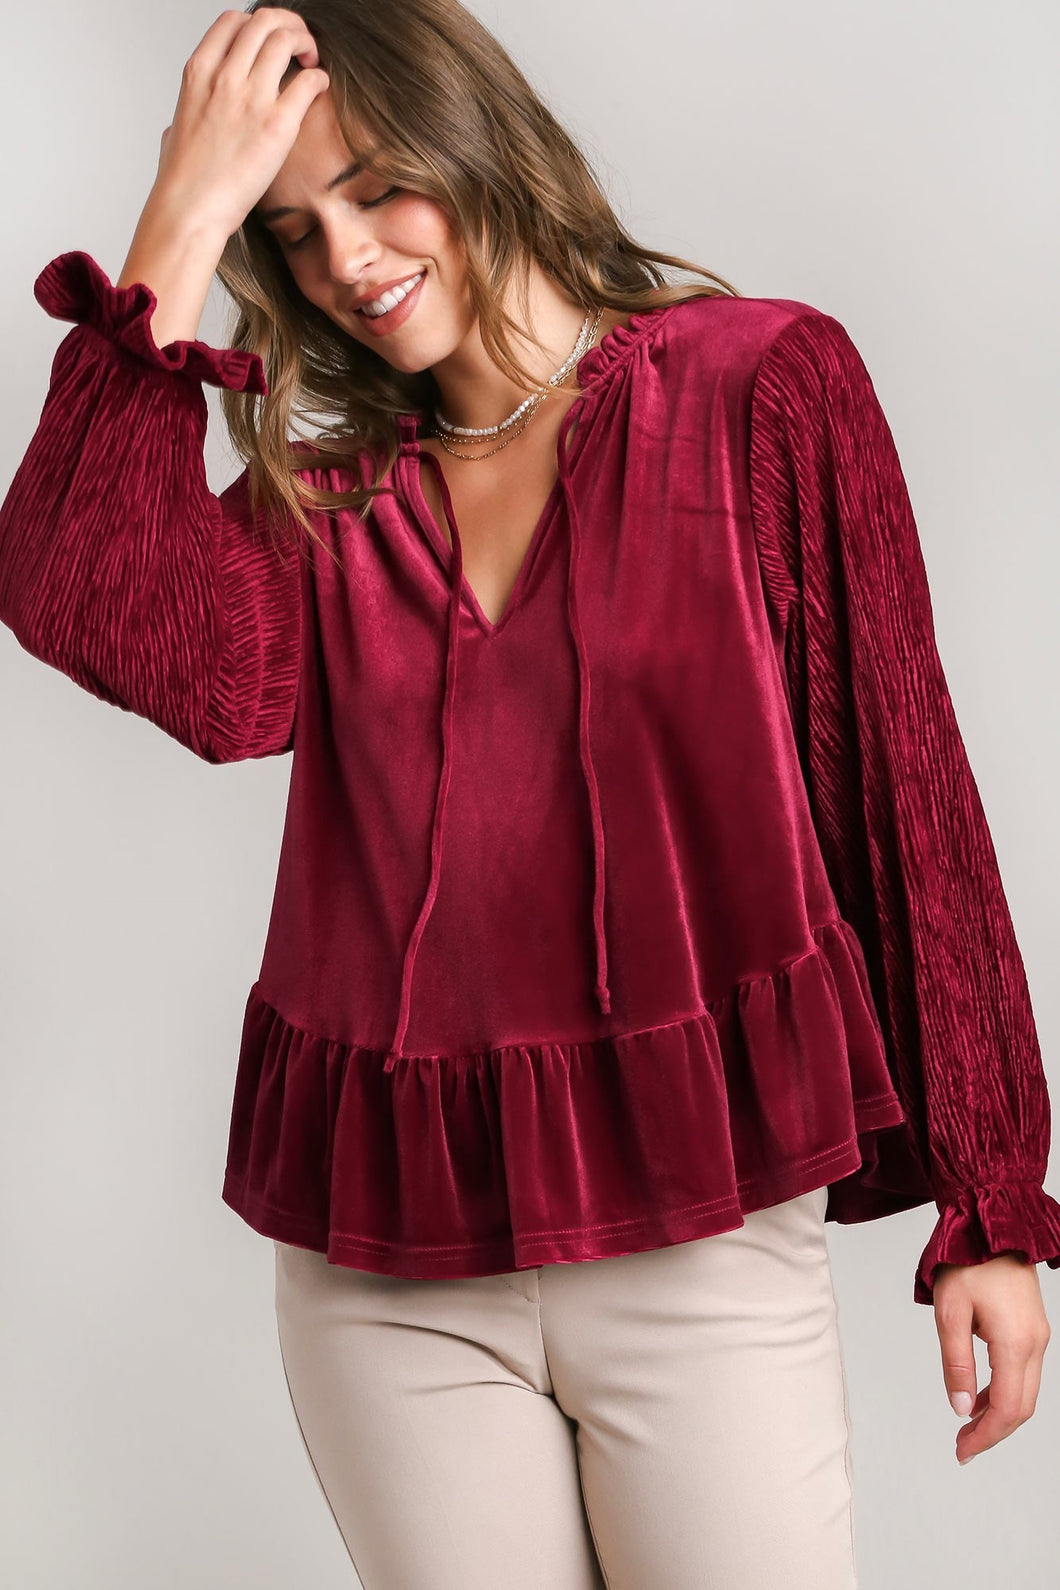 Umgee Velvet BabyDoll Top in Red Shirts & Tops Umgee   